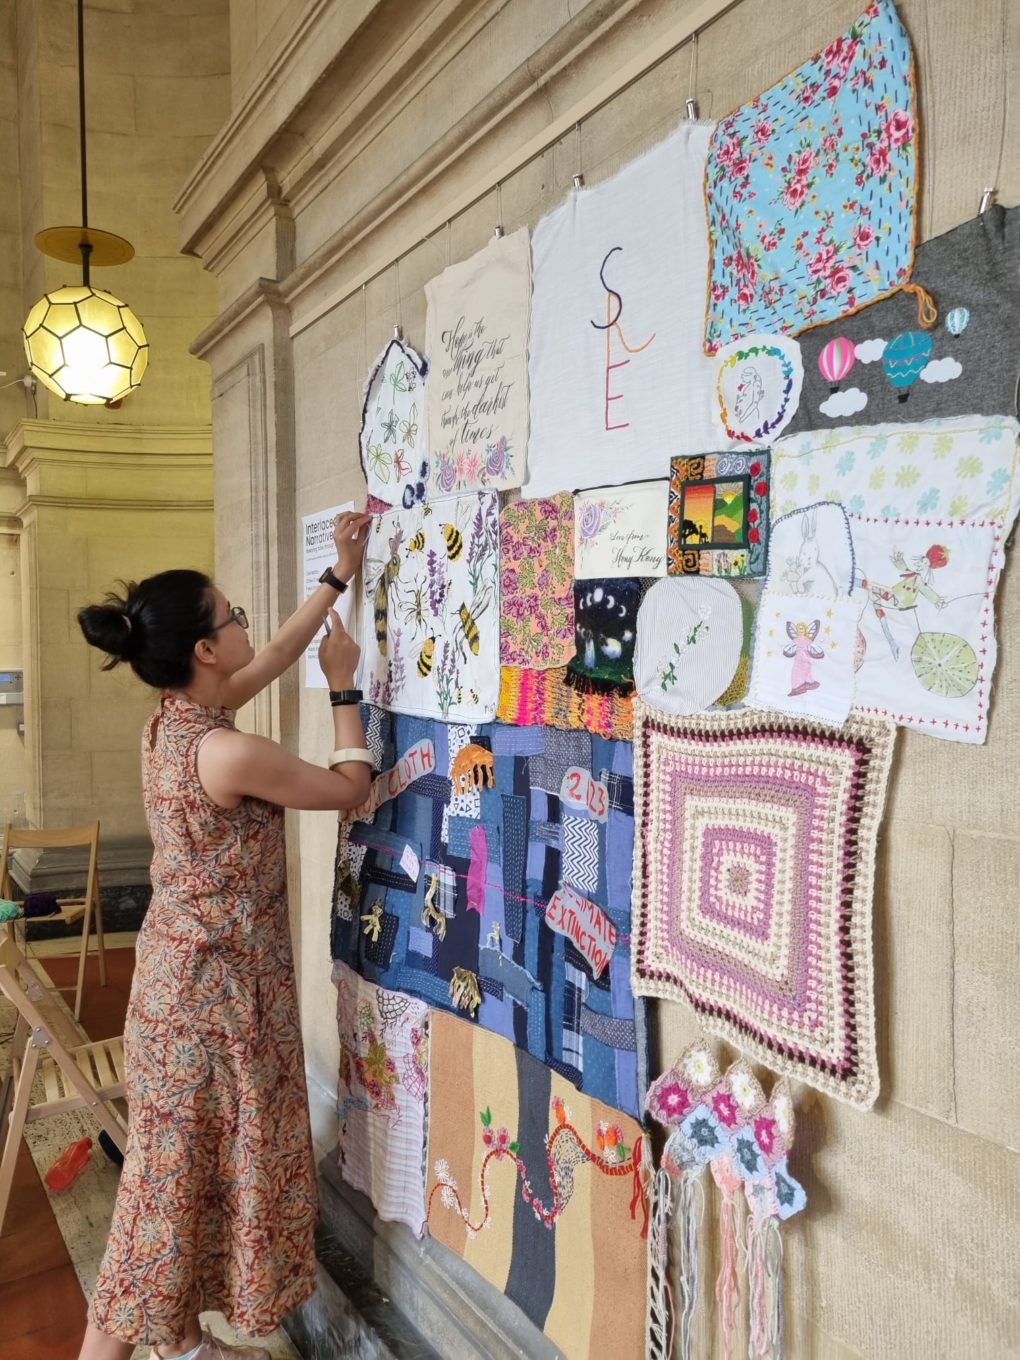 A woman pins embroidery work to a wall display